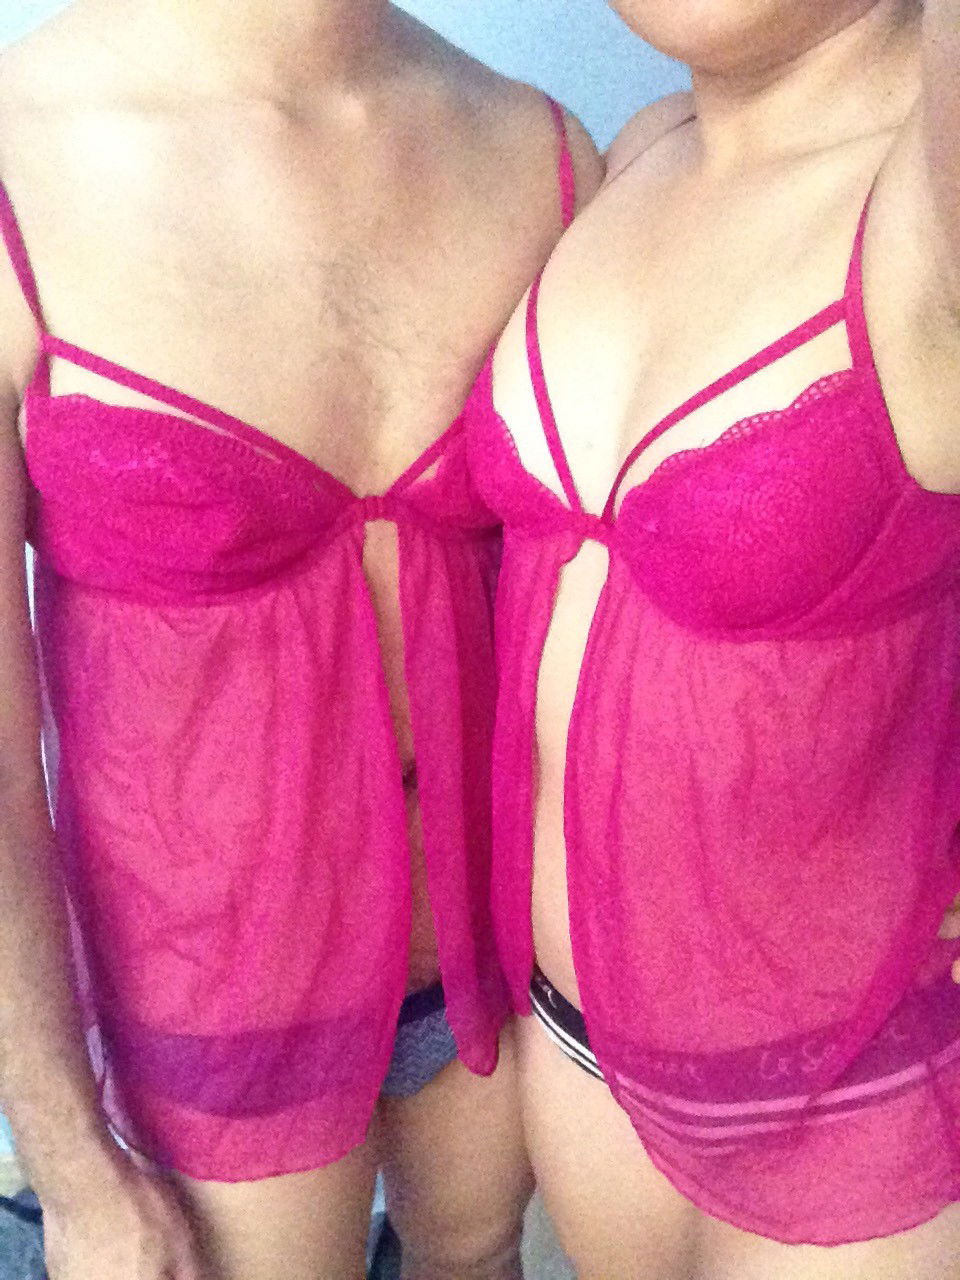 Photo by lingerieheavens with the username @lingerieheavens,  February 24, 2018 at 3:19 PM and the text says 'Our favourite lingerie brand. La Senza!! This babydoll is our fave so far. #us  #couple  #Asian  #lingerie  #sggirl  #sgboy  #sgcouple  #amateur  #xd  #couple'